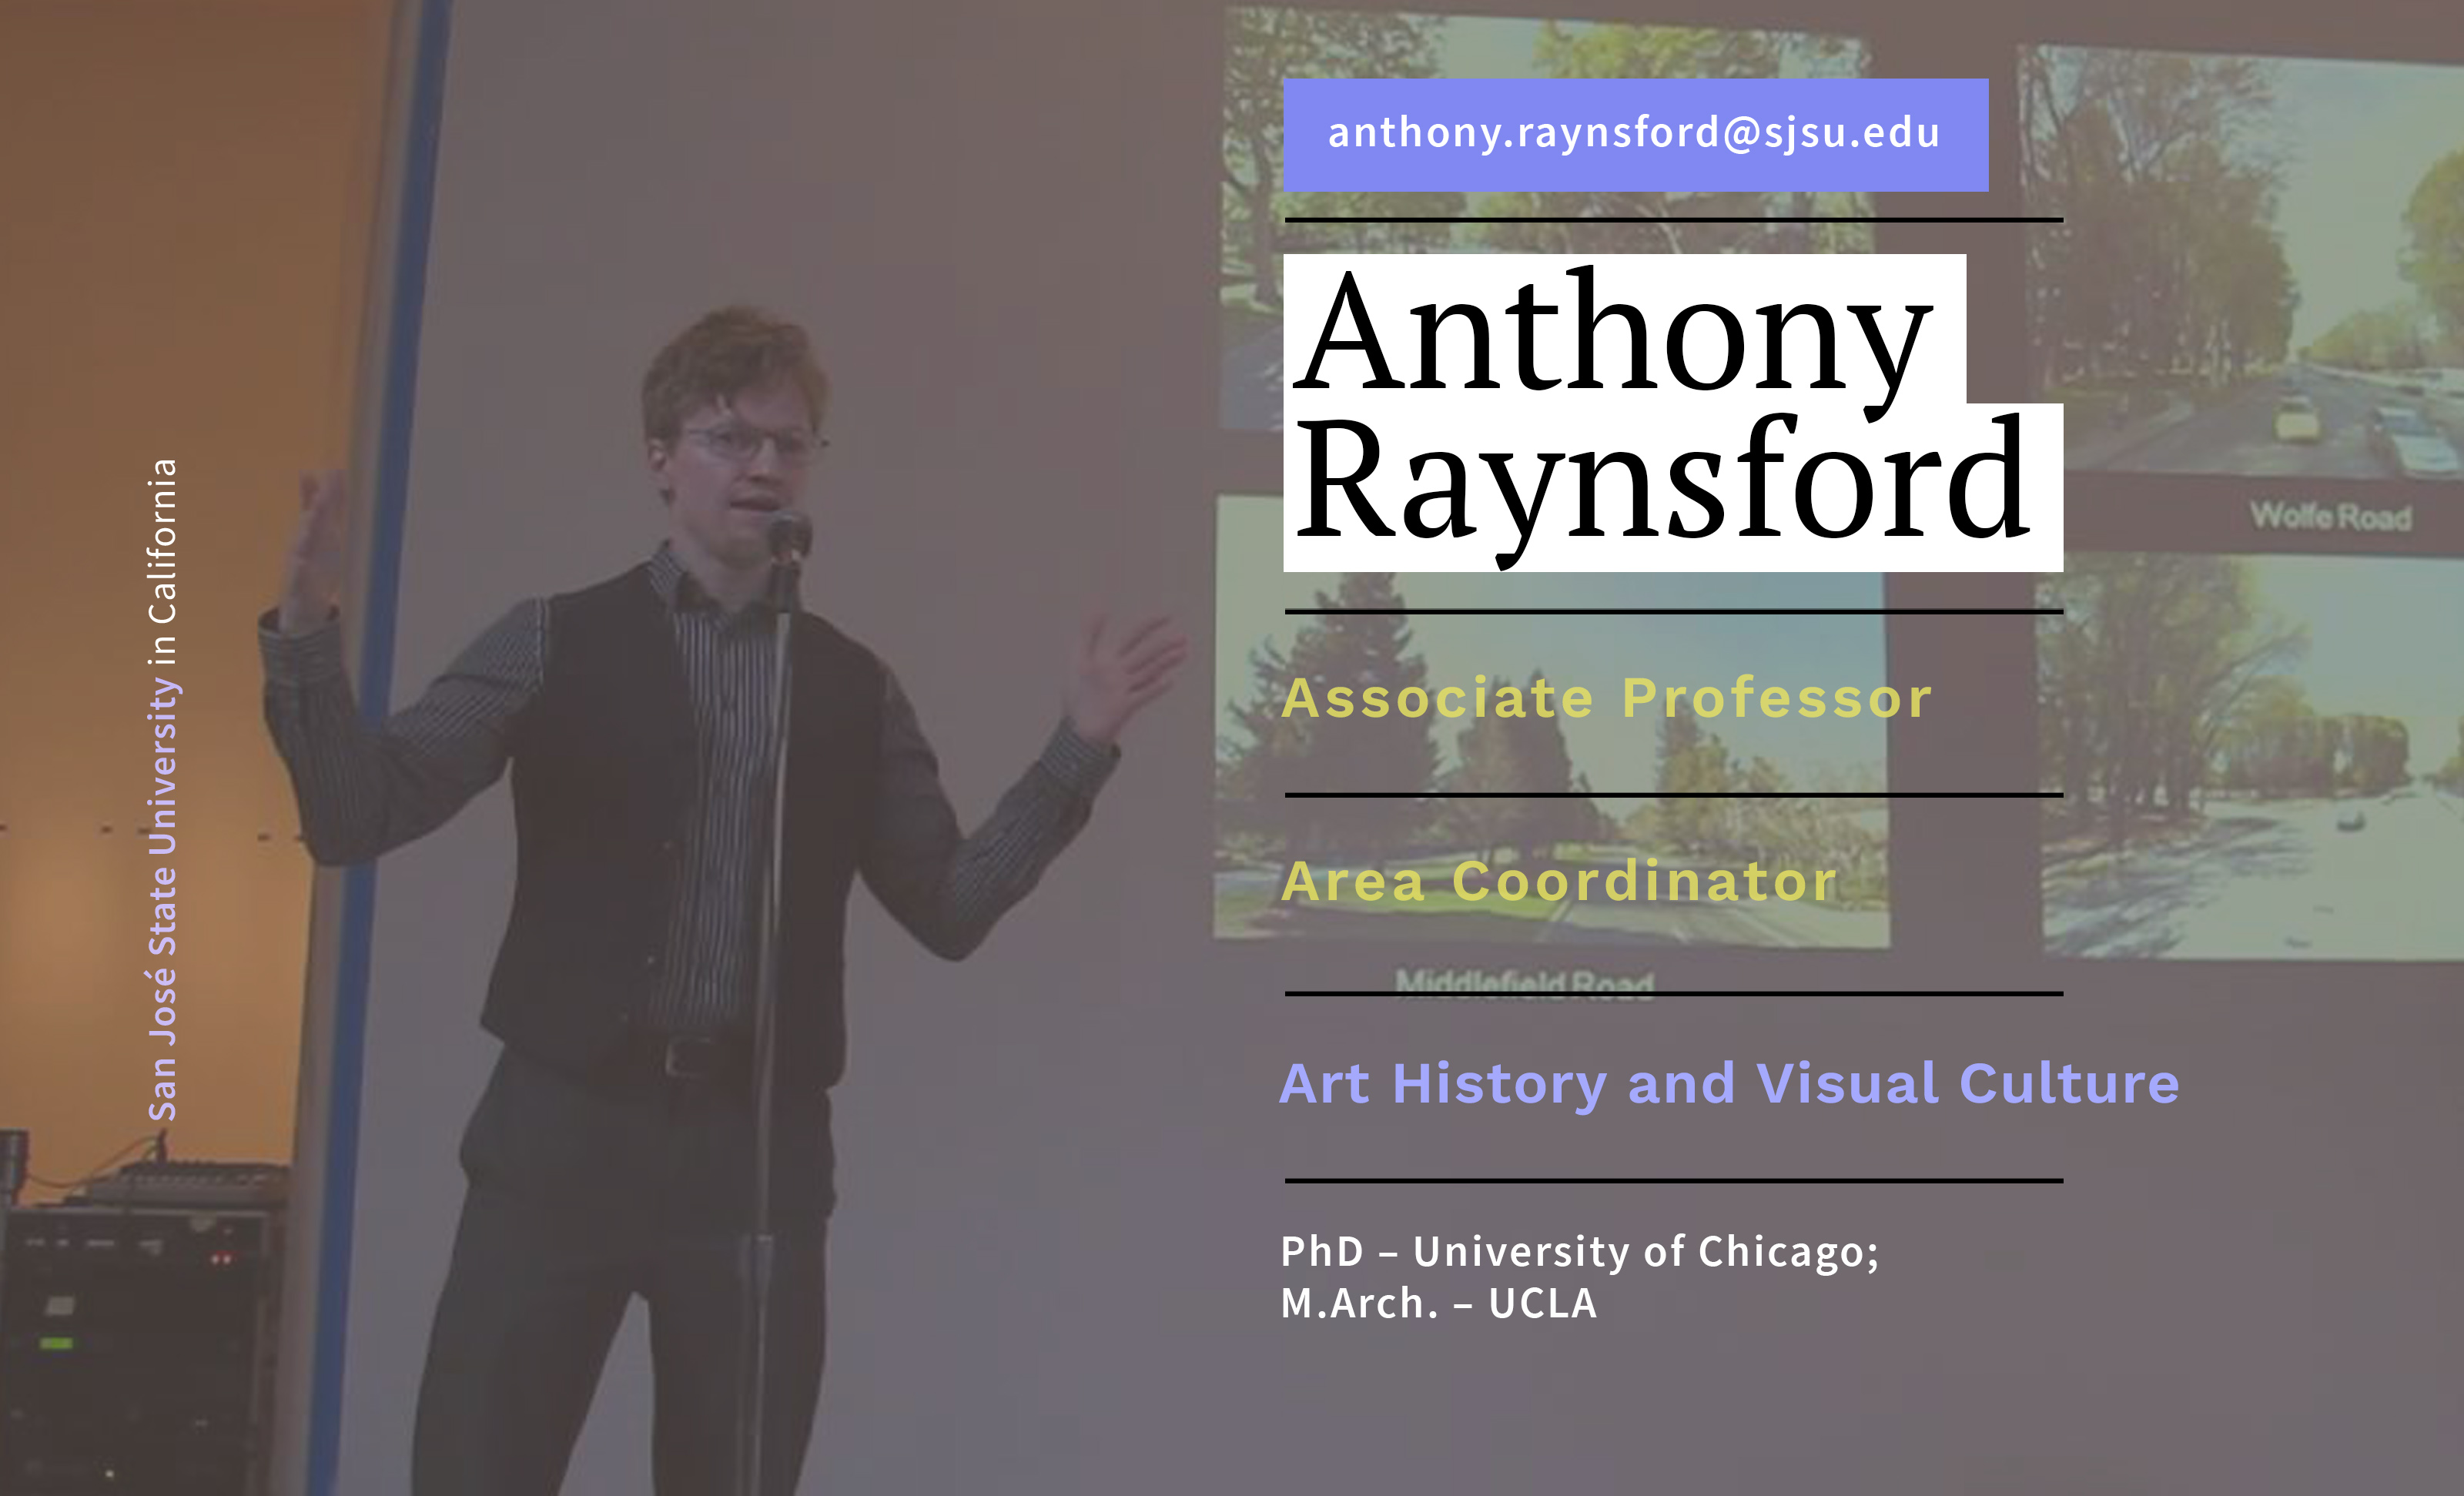 Anthony Raysnford presenting to an audience.